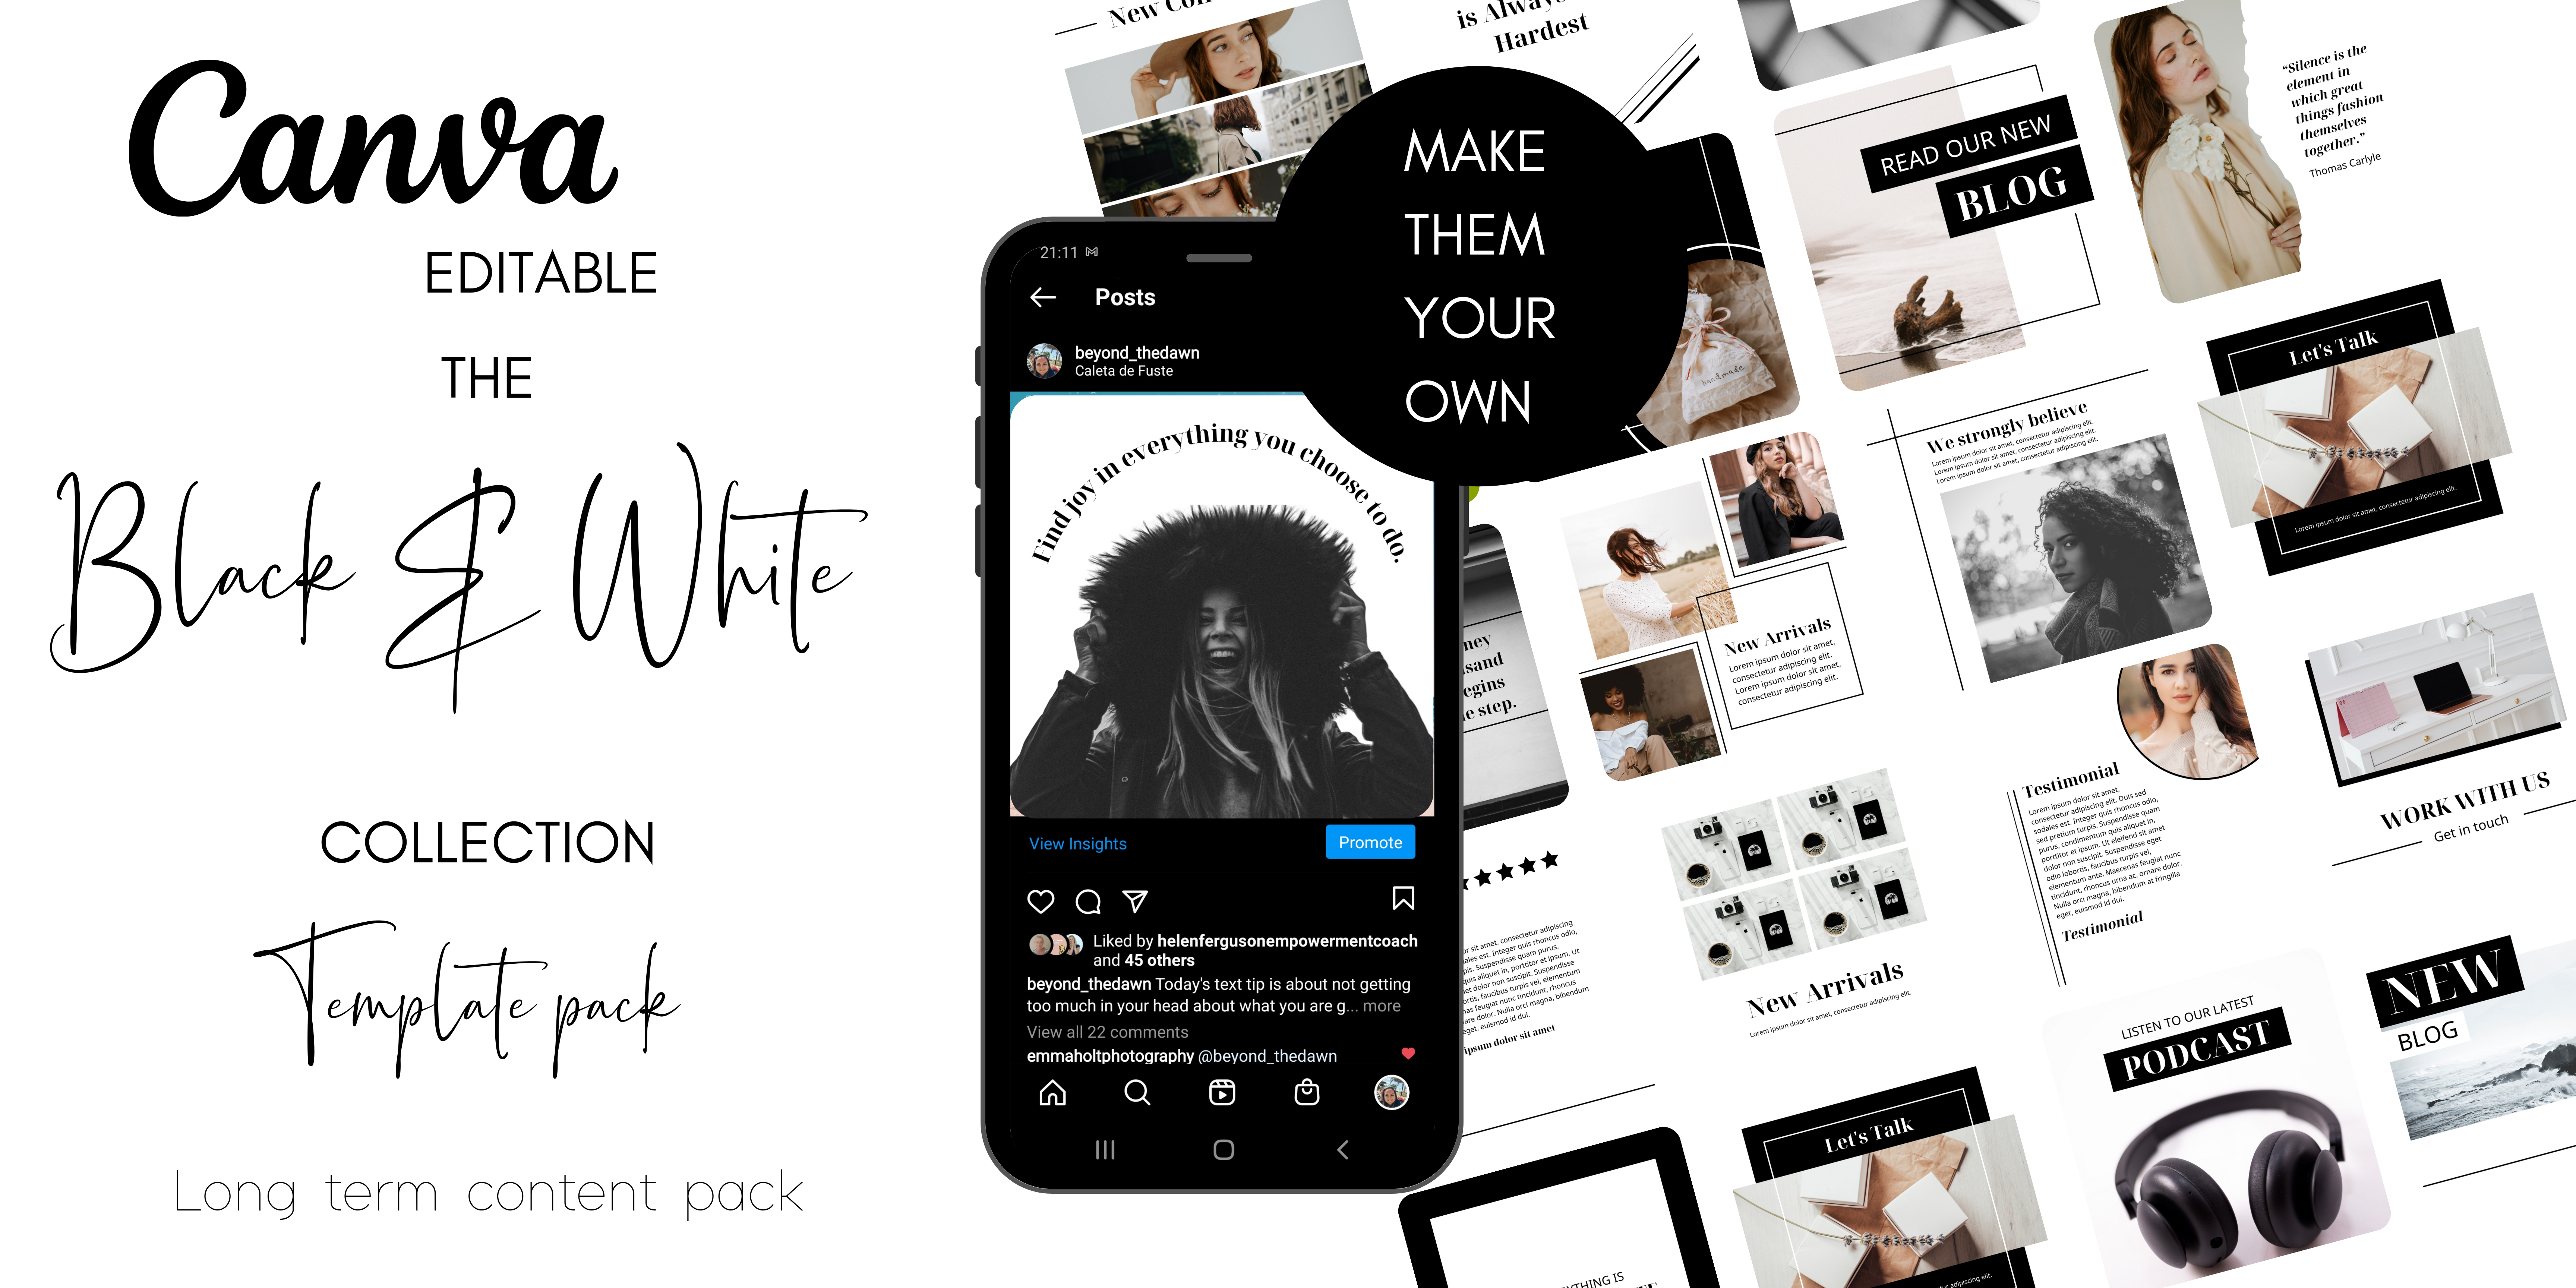 black and white social media post graphics in monochrome shades behind a mobile phone display